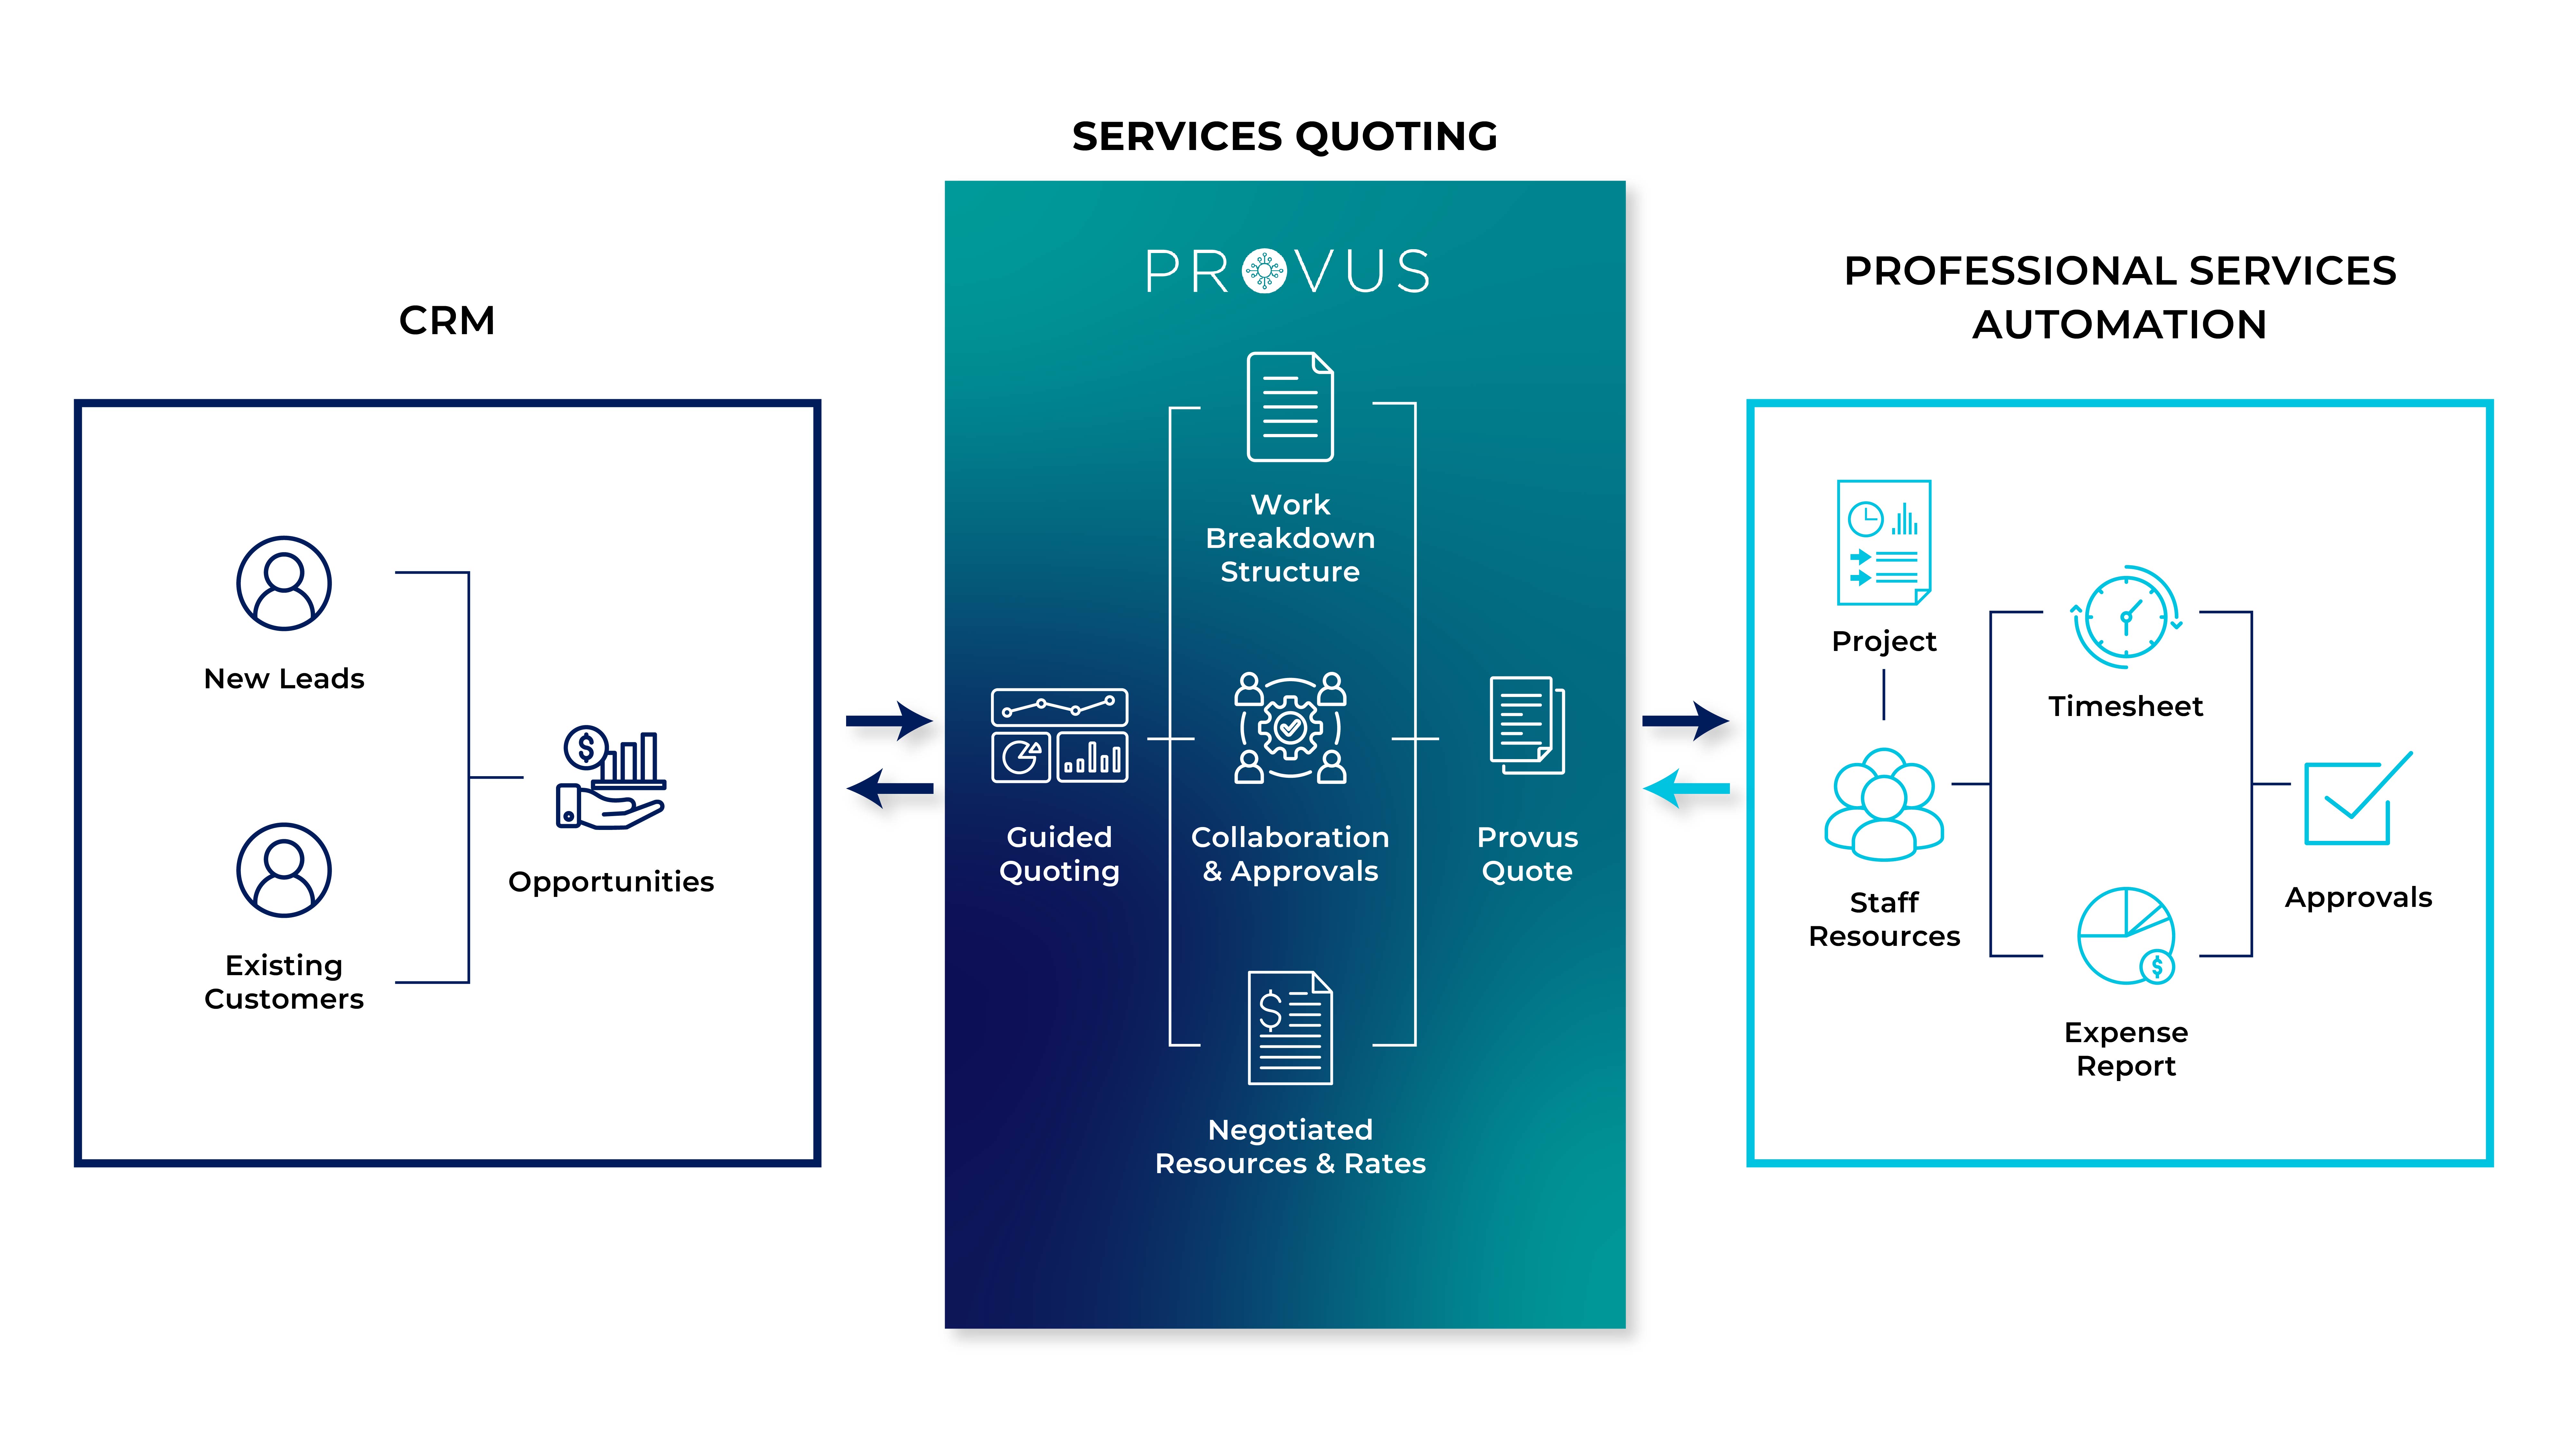 Connecting Professional Services automation with Services CPQ and CRM